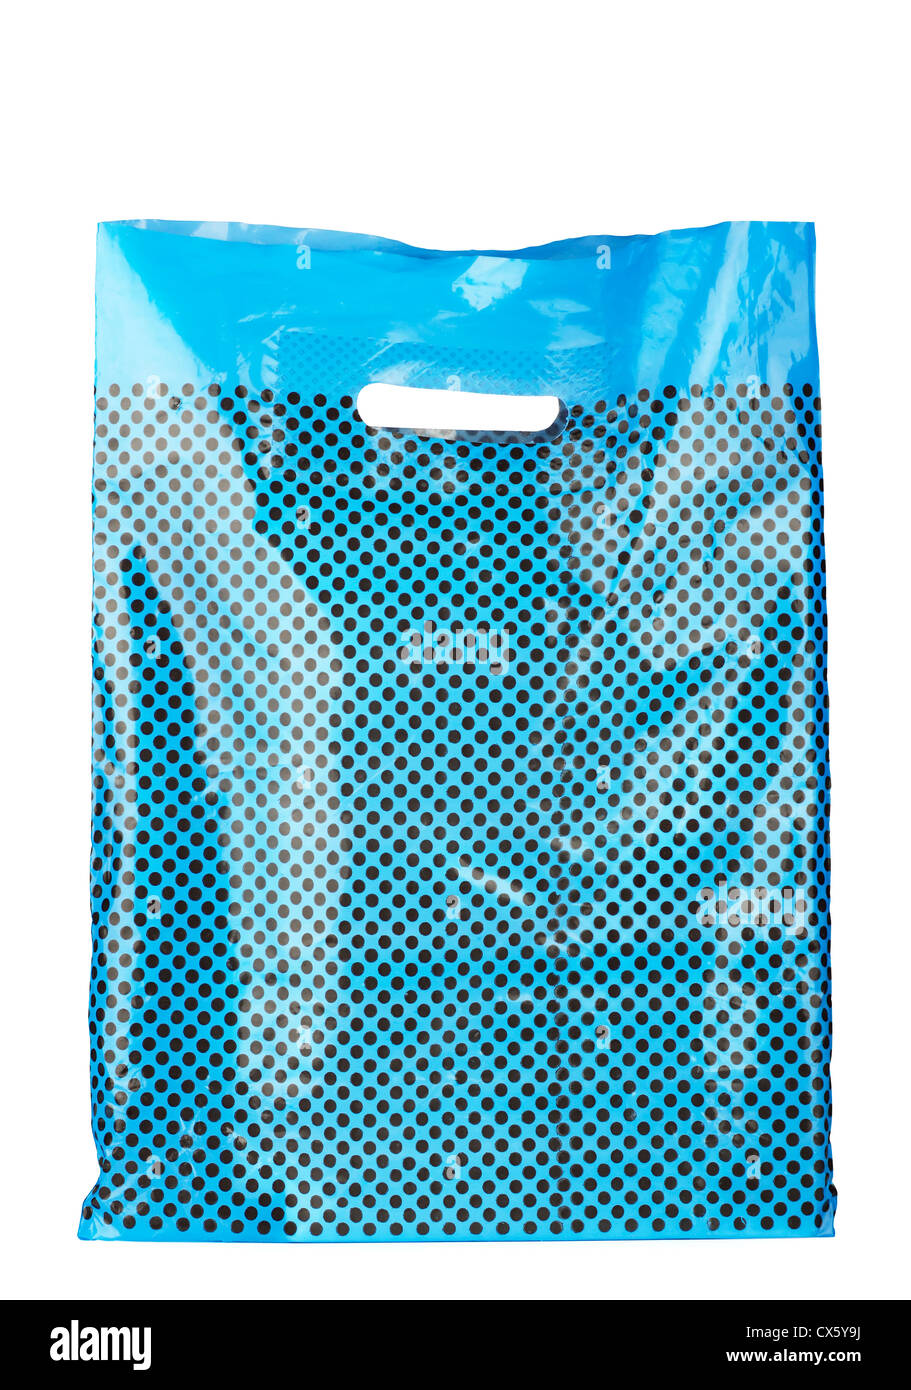 Blue spotted plastic shopping bag isolated on white Stock Photo